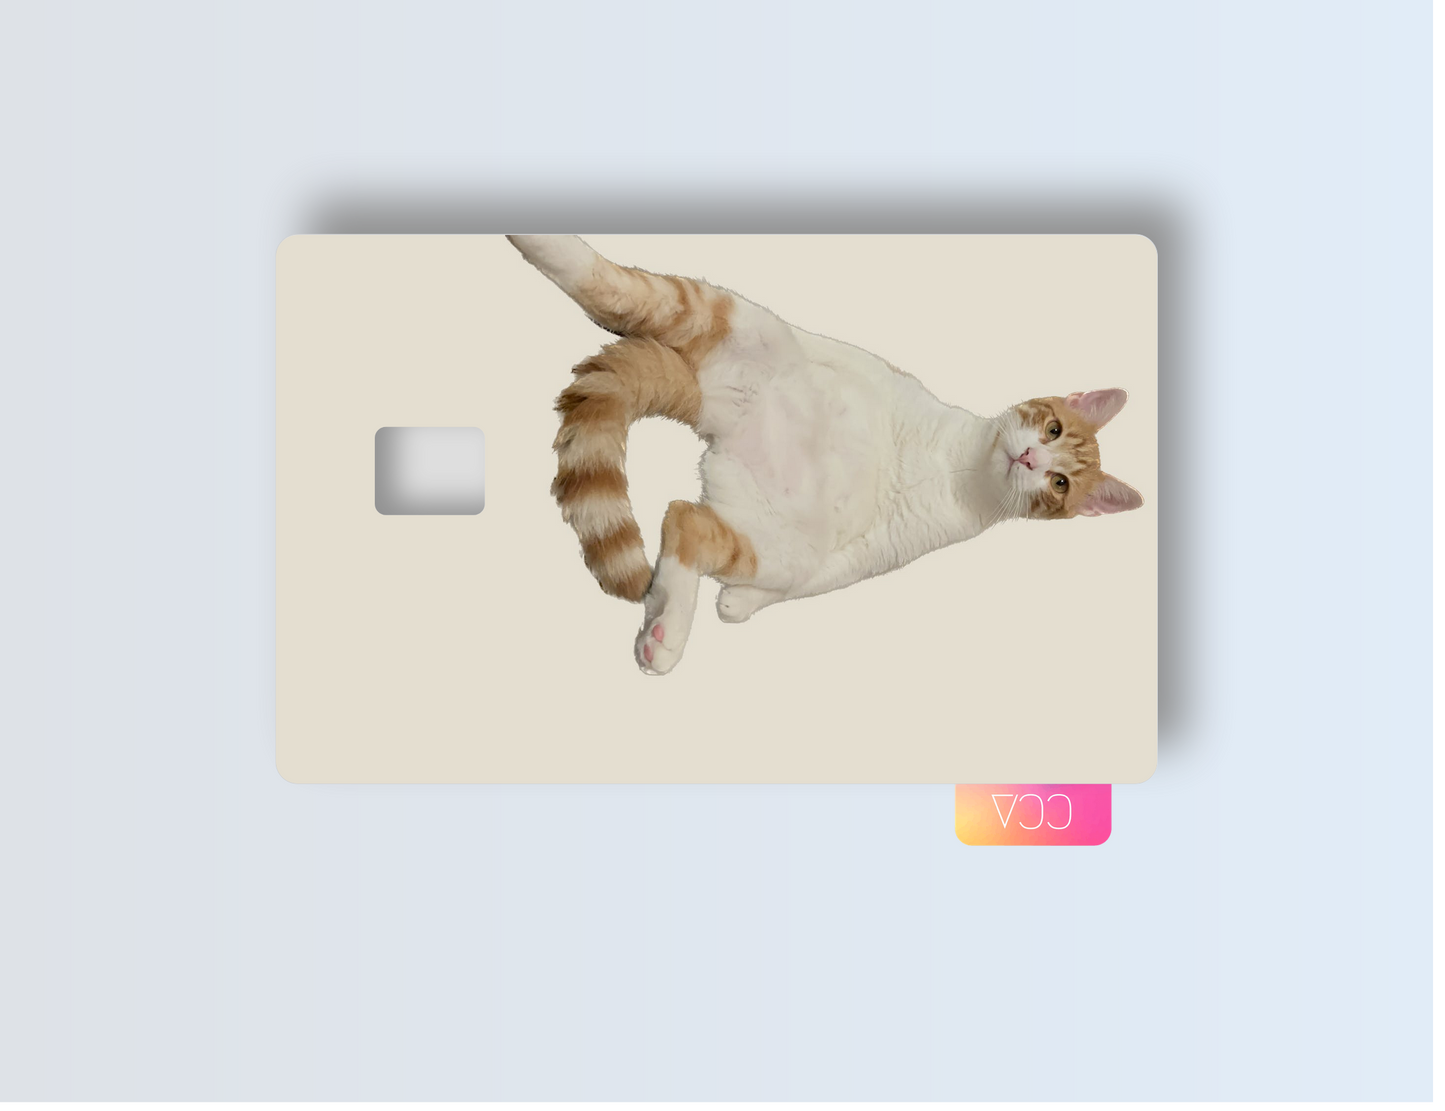 Couch Cat Credit card covers, credit card skins